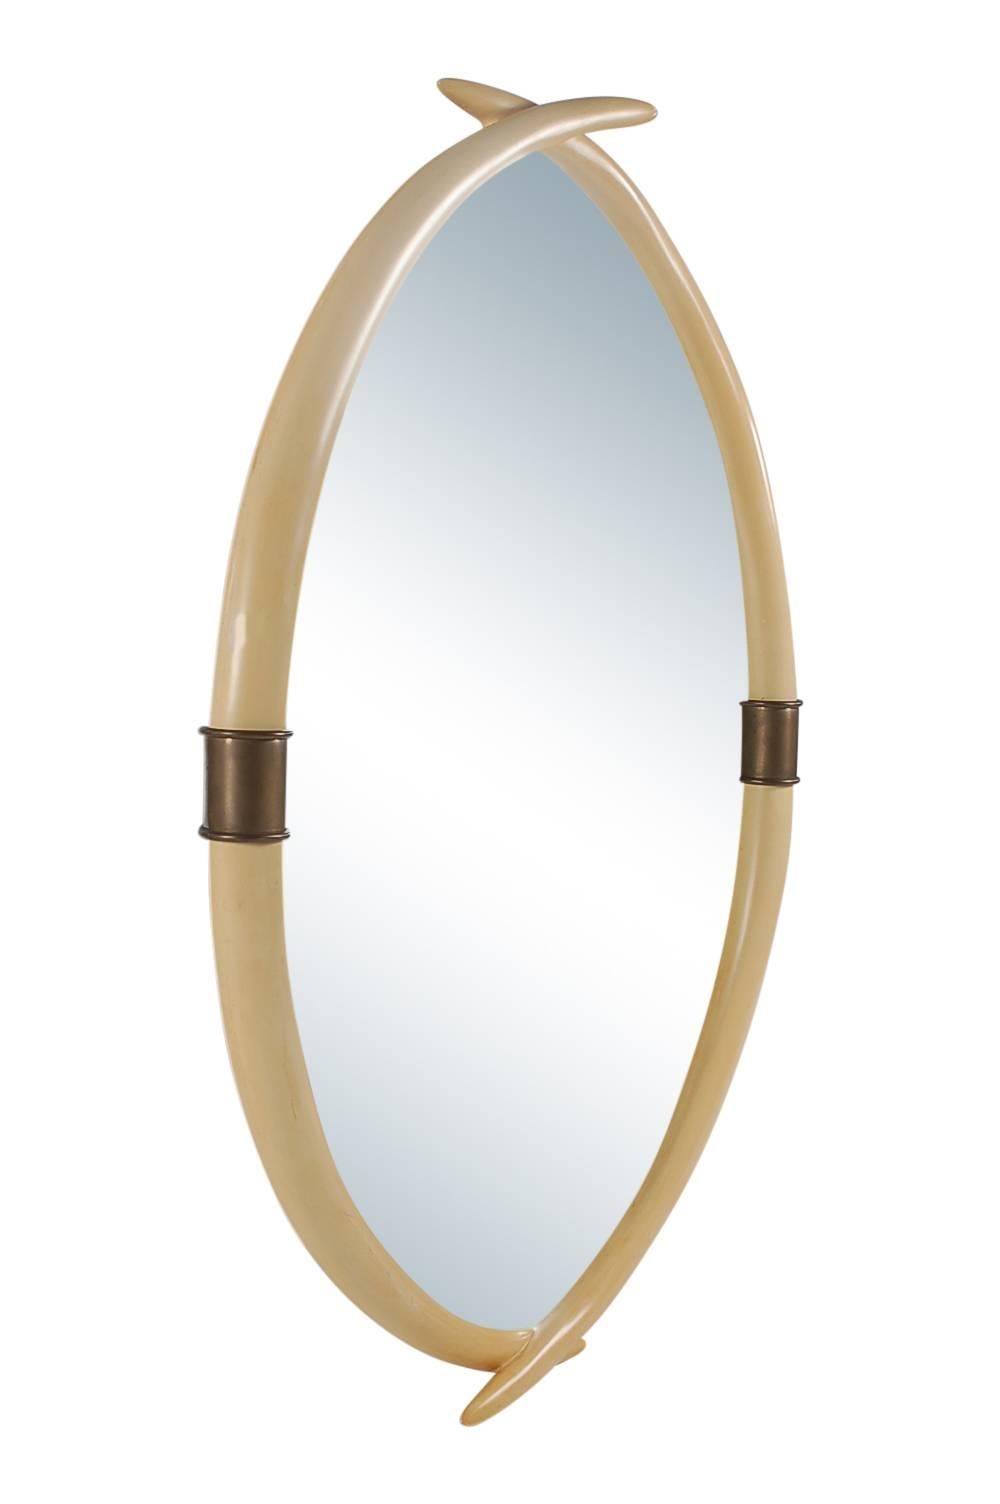 American Hollywood Regency Brass and Faux Ivory Tusk Wall Mirror, Mid-Century Modern